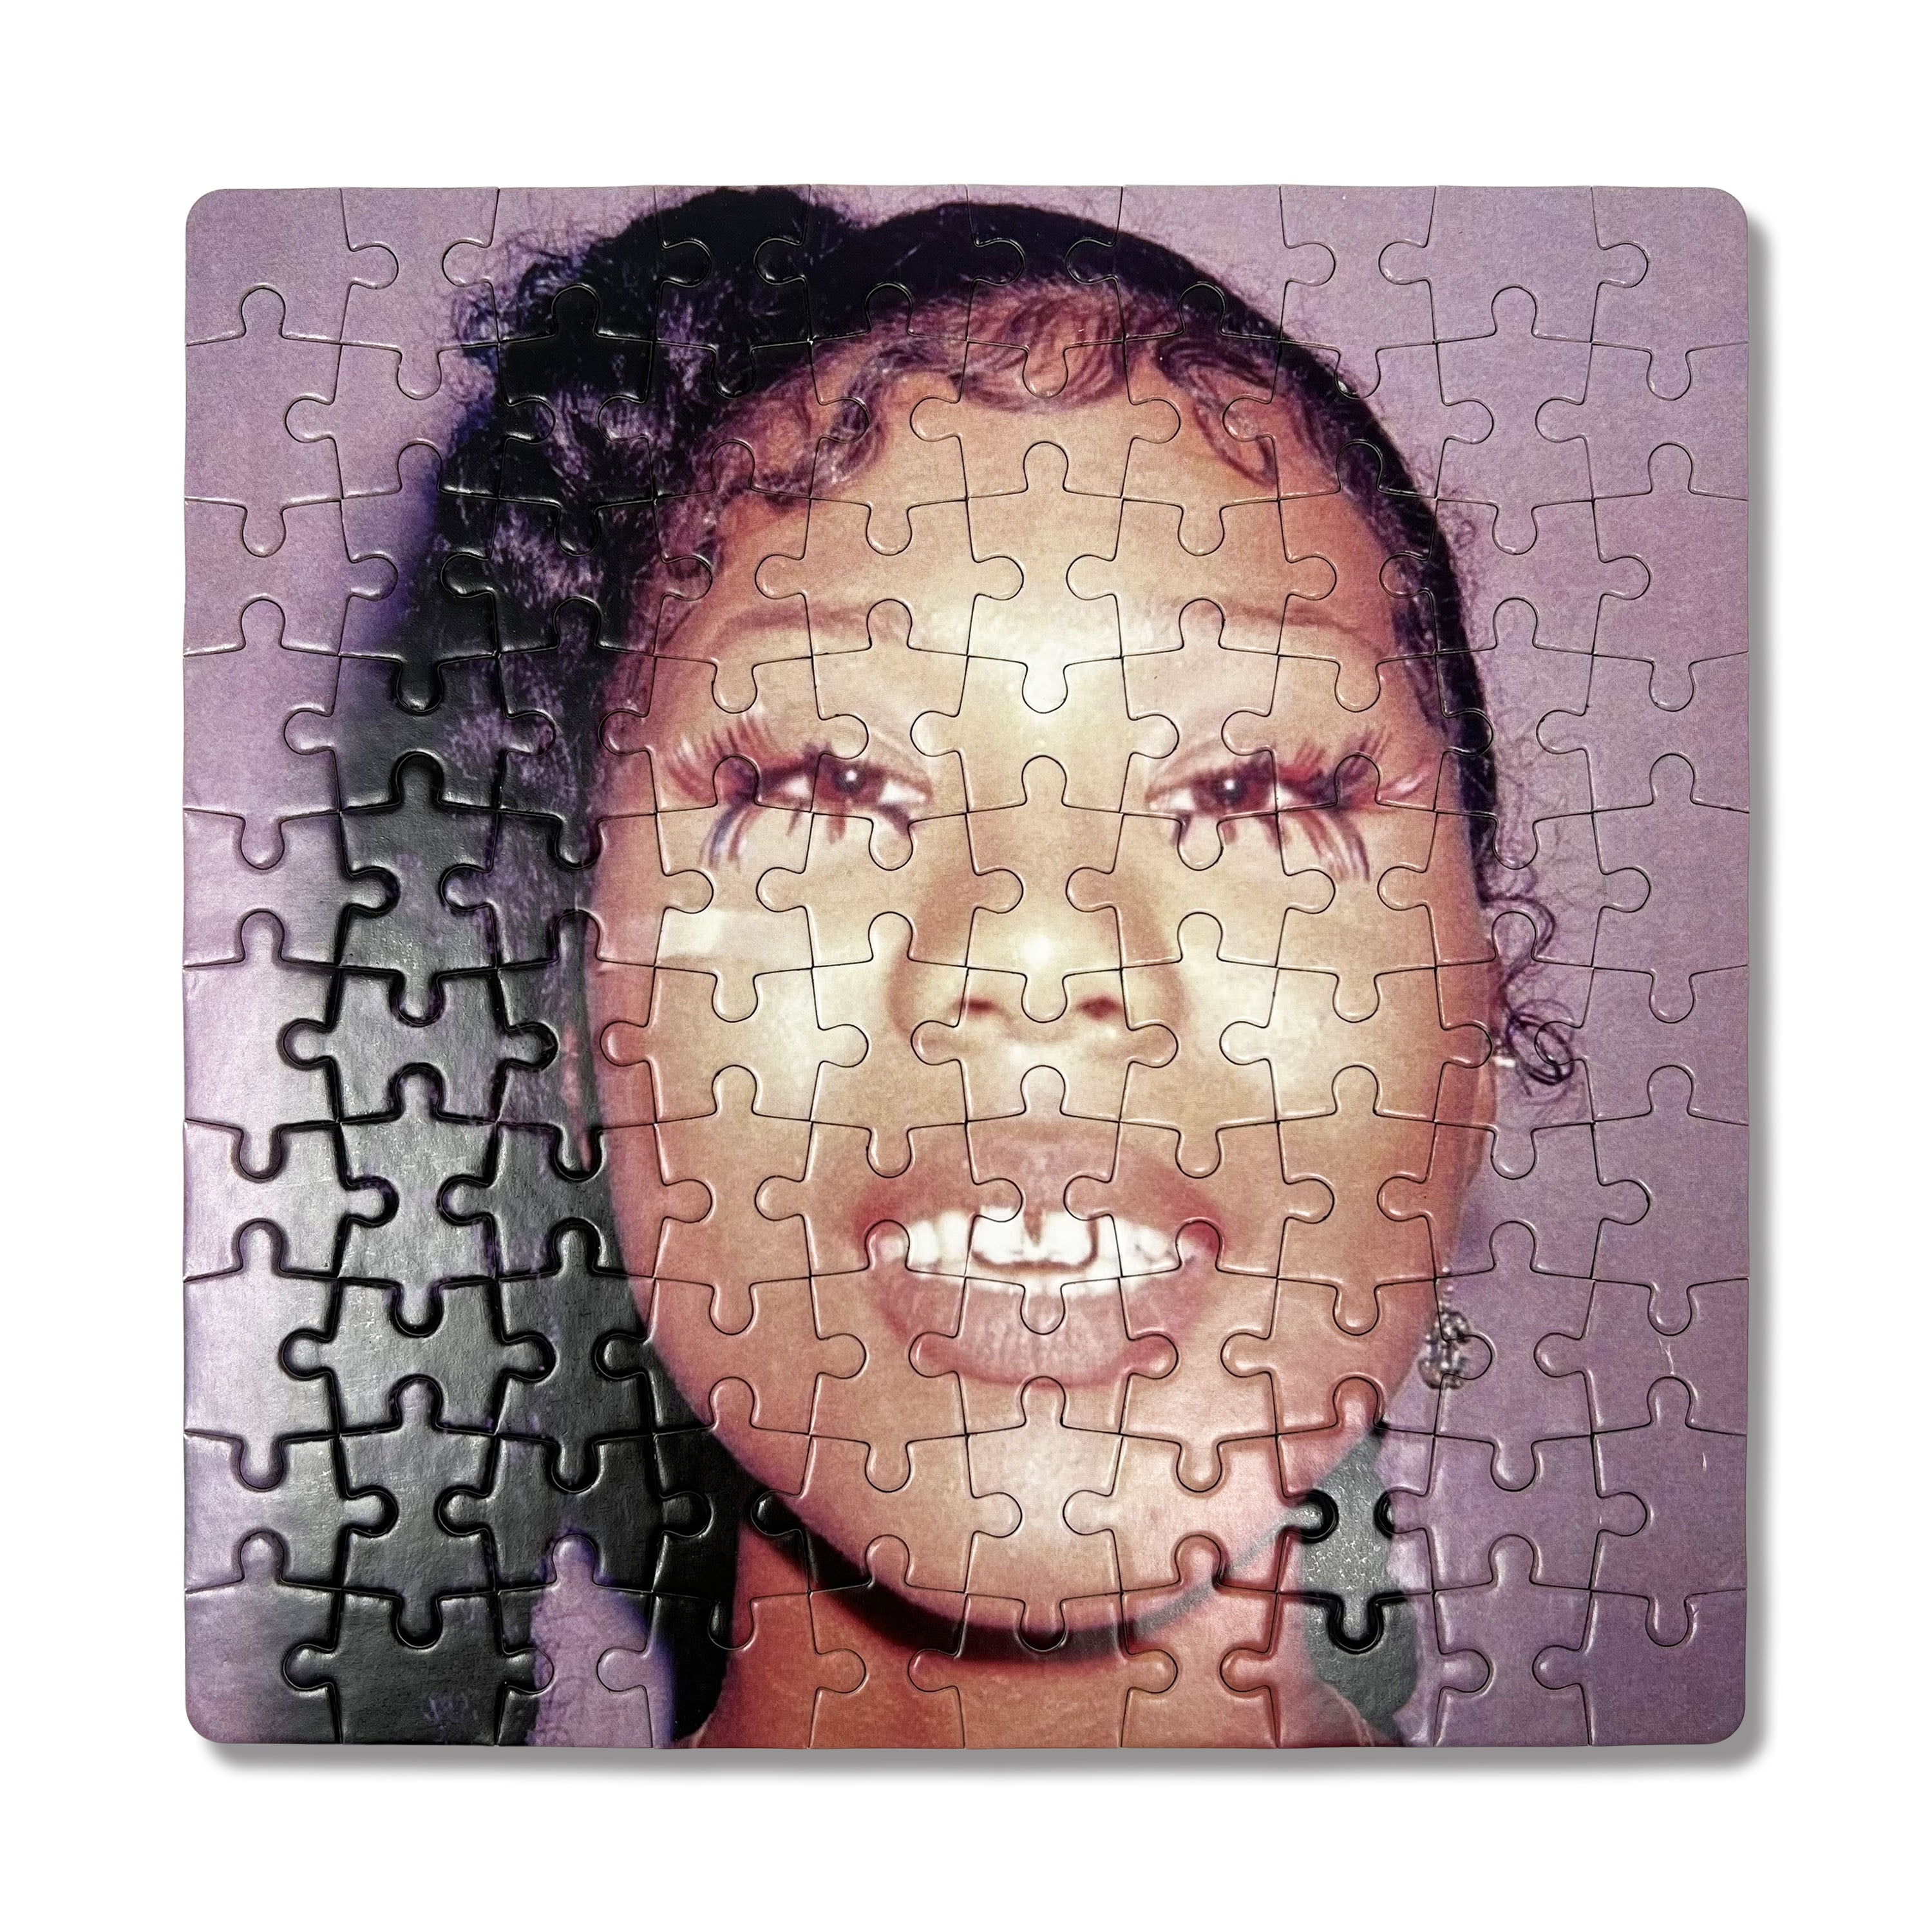 Her Loss Puzzle